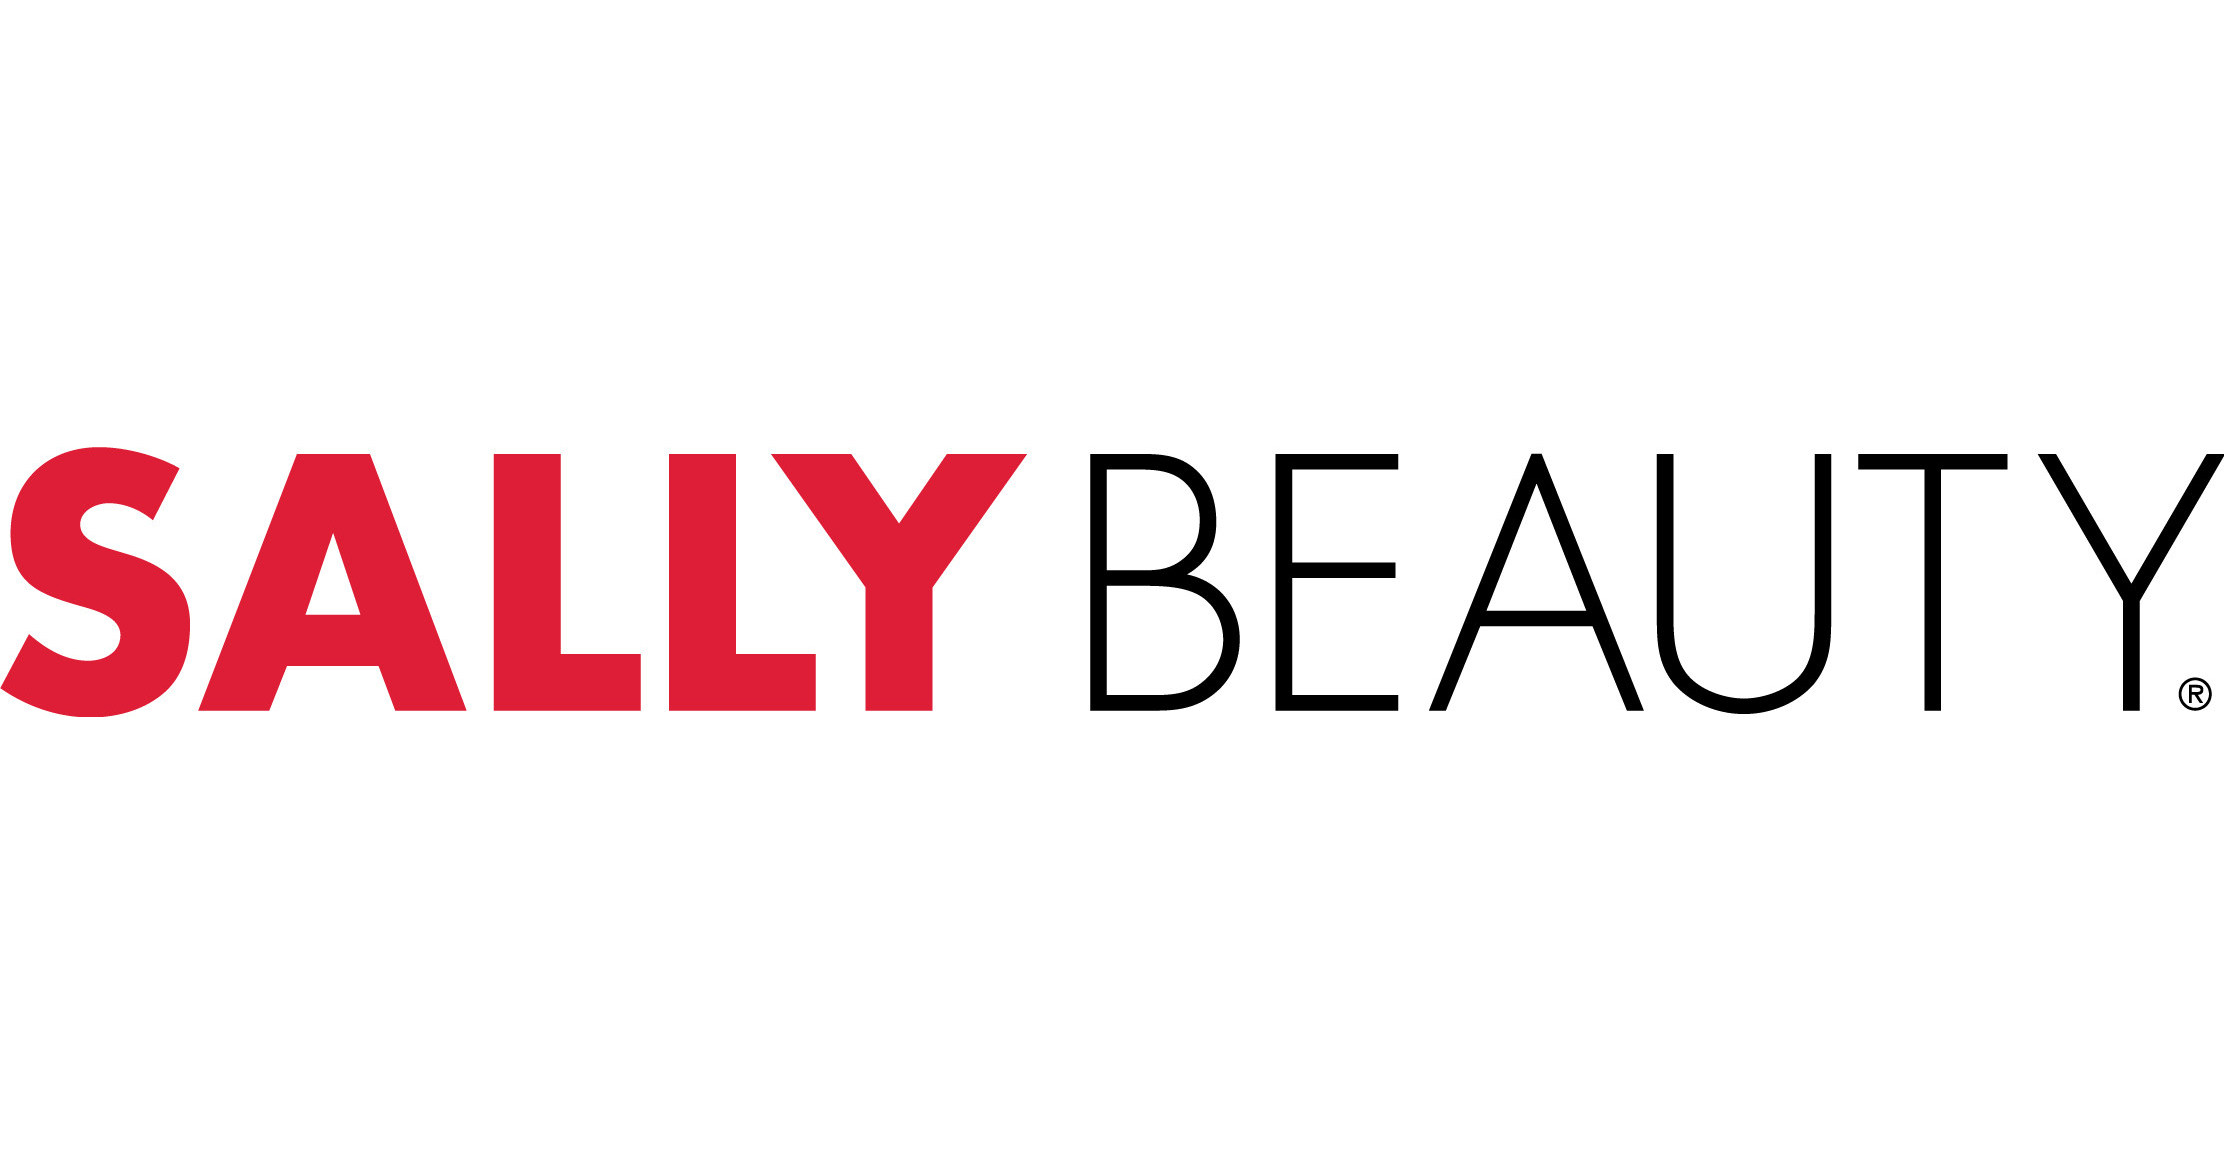 Sally Beauty Reinforces Its Standing as the Destination for DIY Beauty and Self-Expression